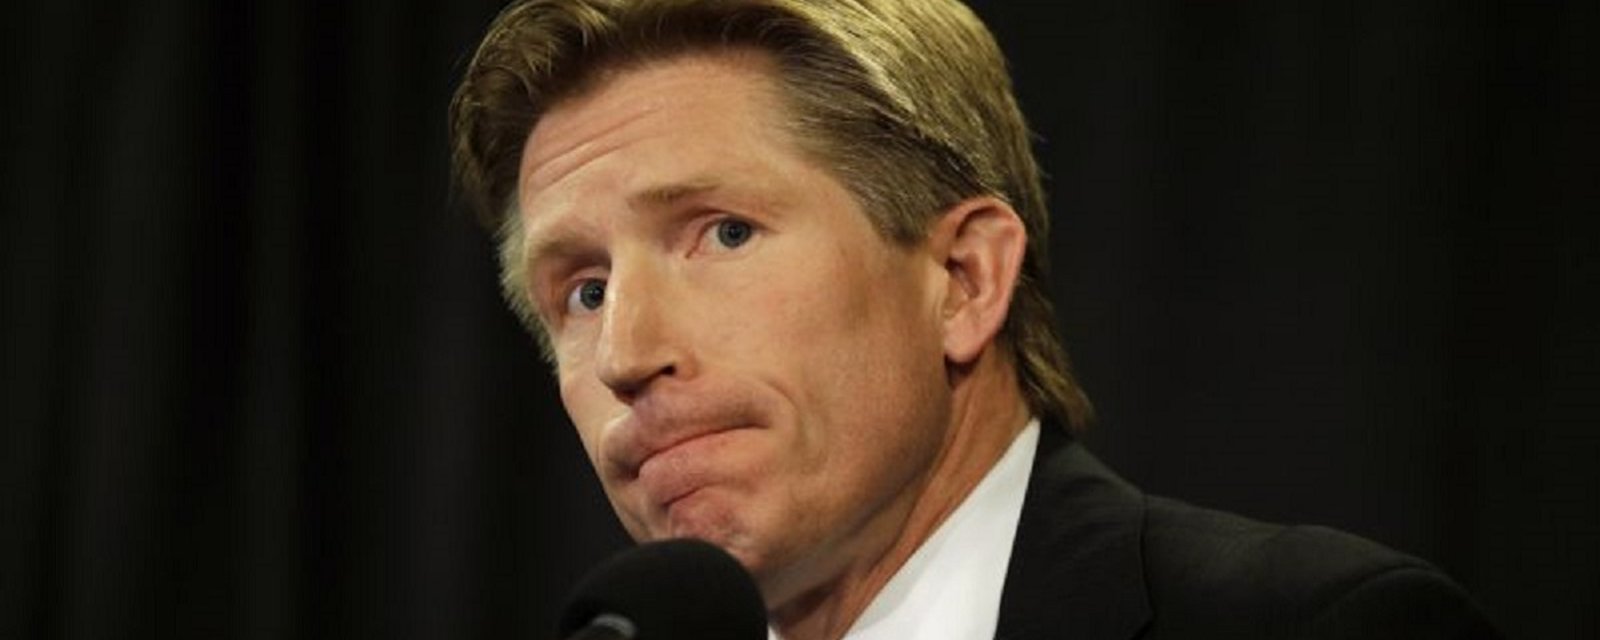 Breaking: Hakstol not the ice for practice, has officially been fired.